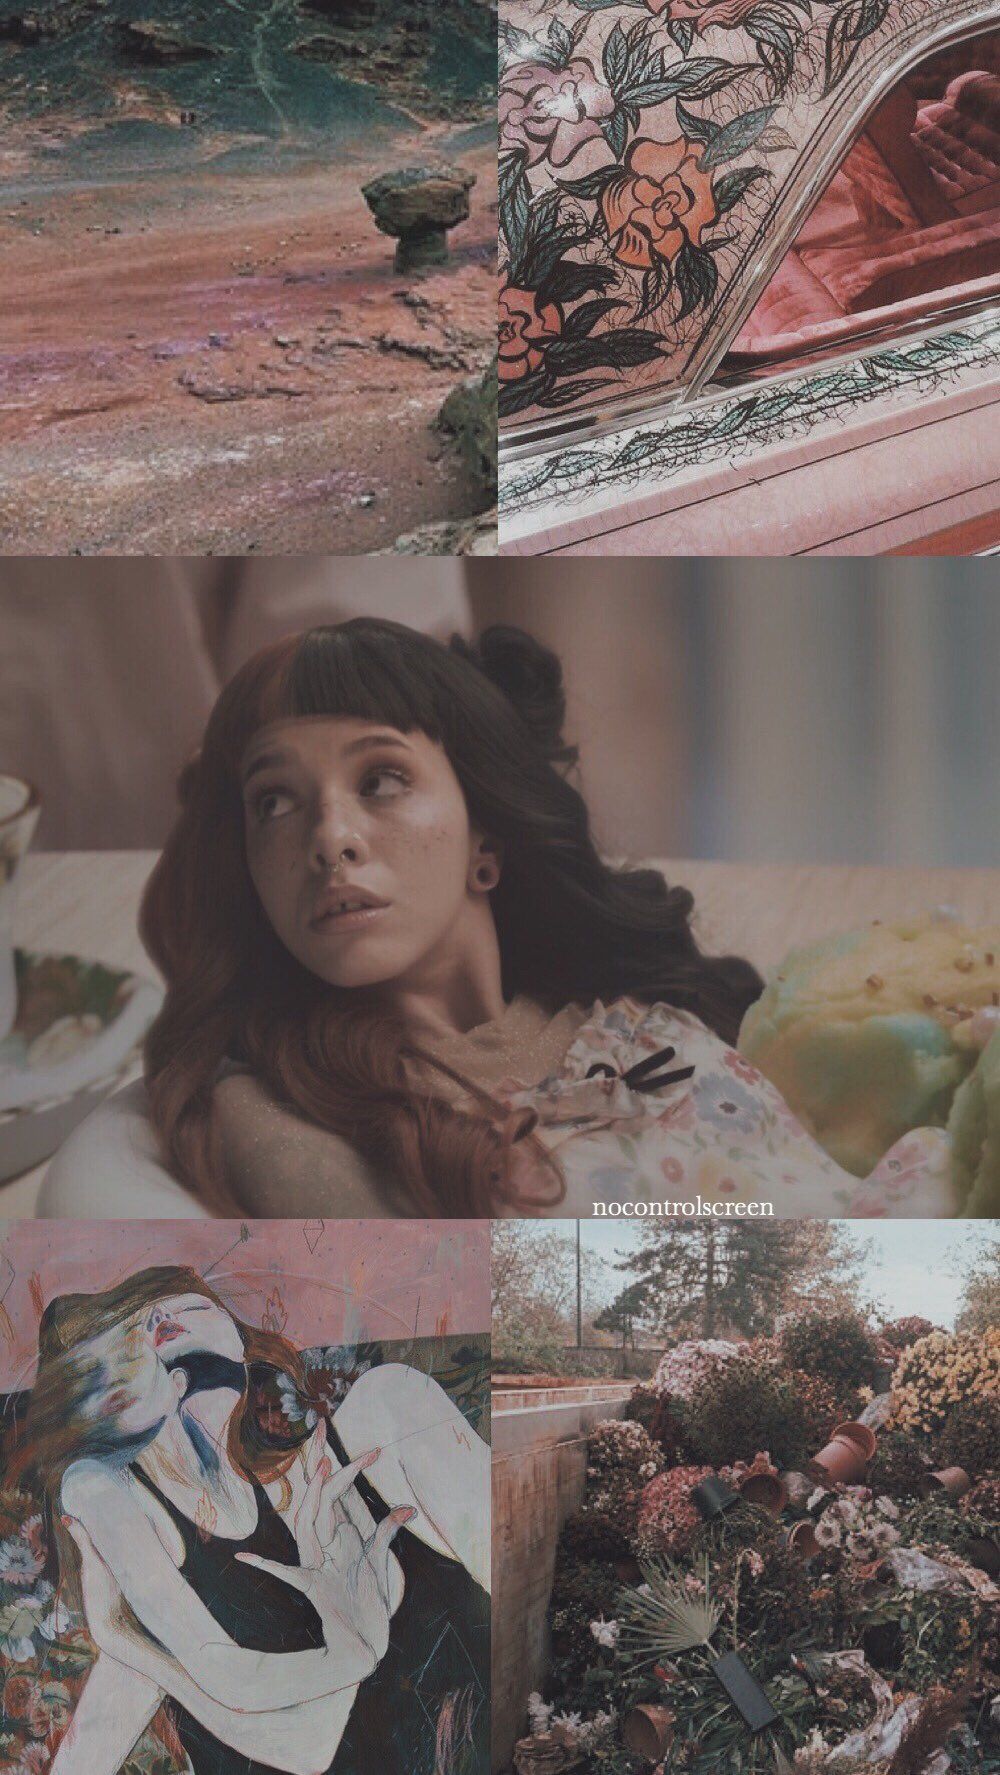 A collage of pictures with different artwork - Melanie Martinez